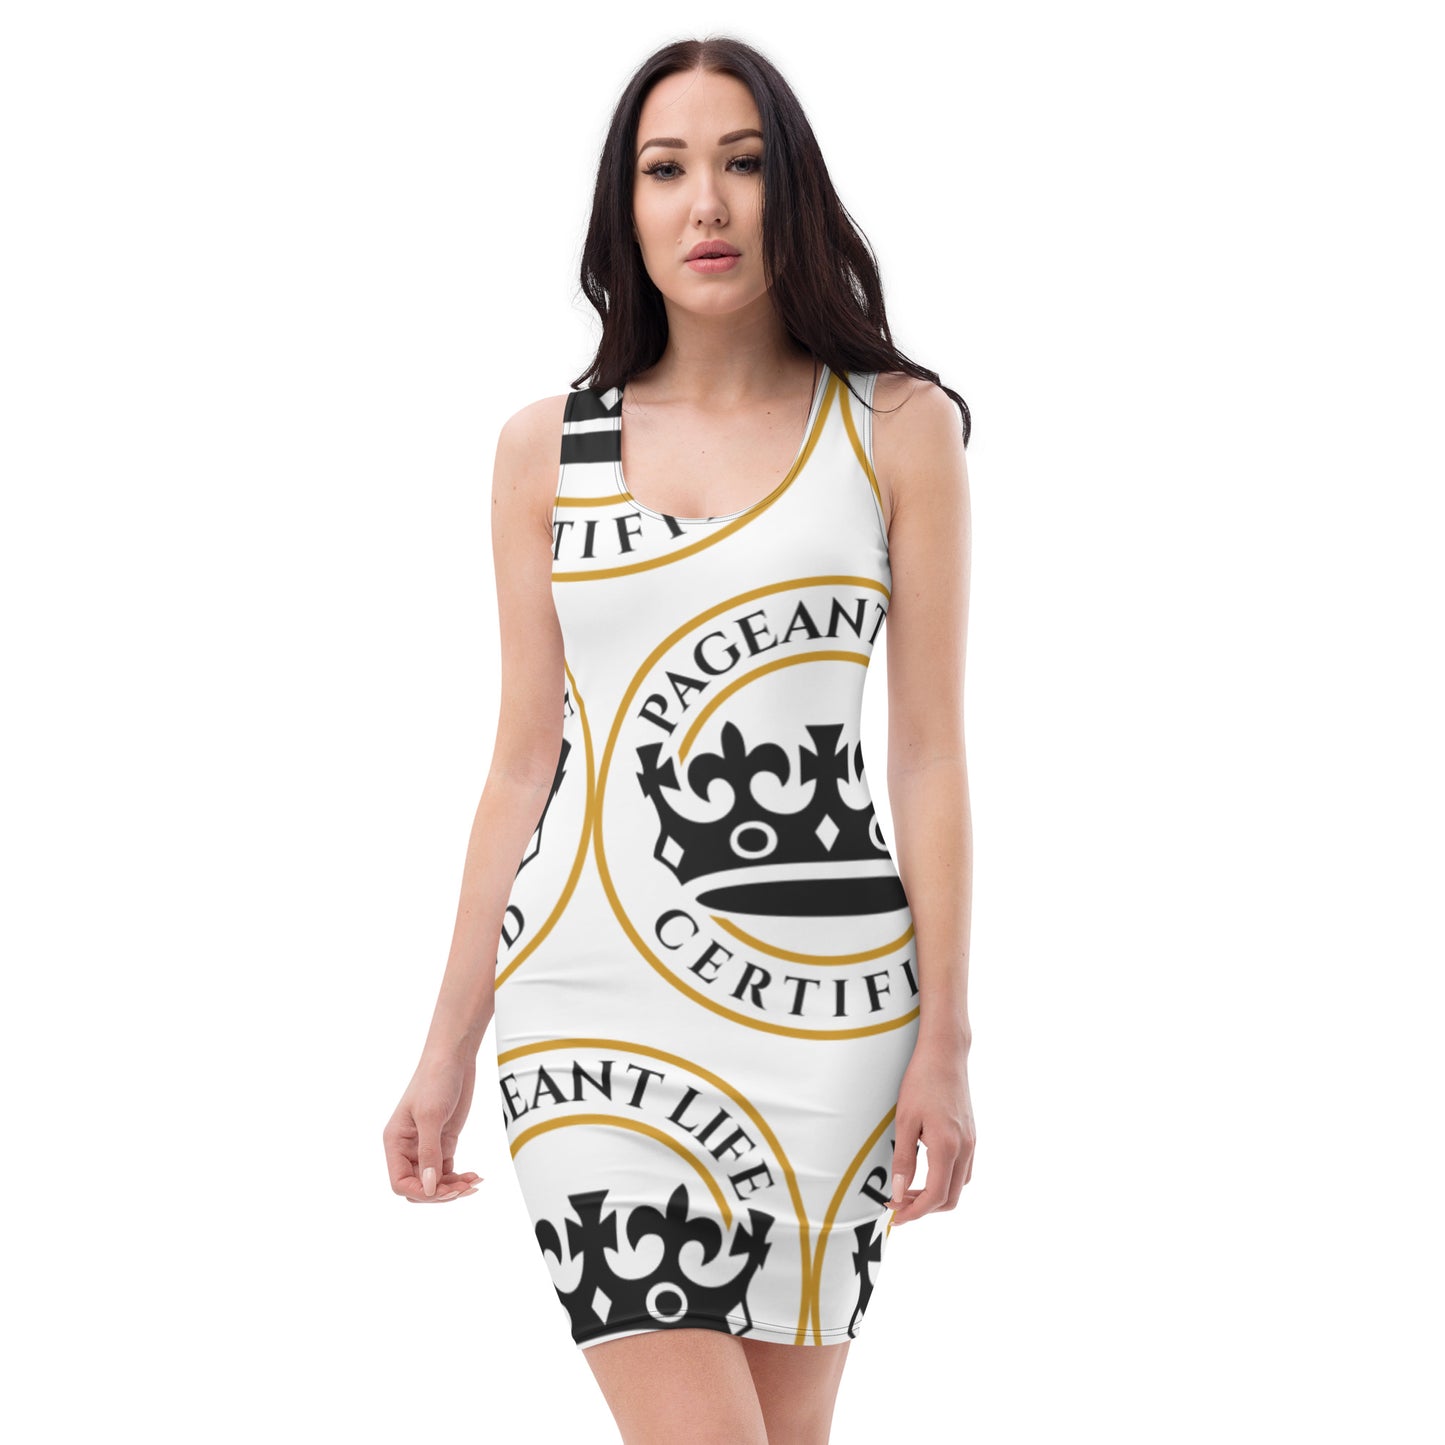 Black and Gold/White Pageant Life Certified Dress